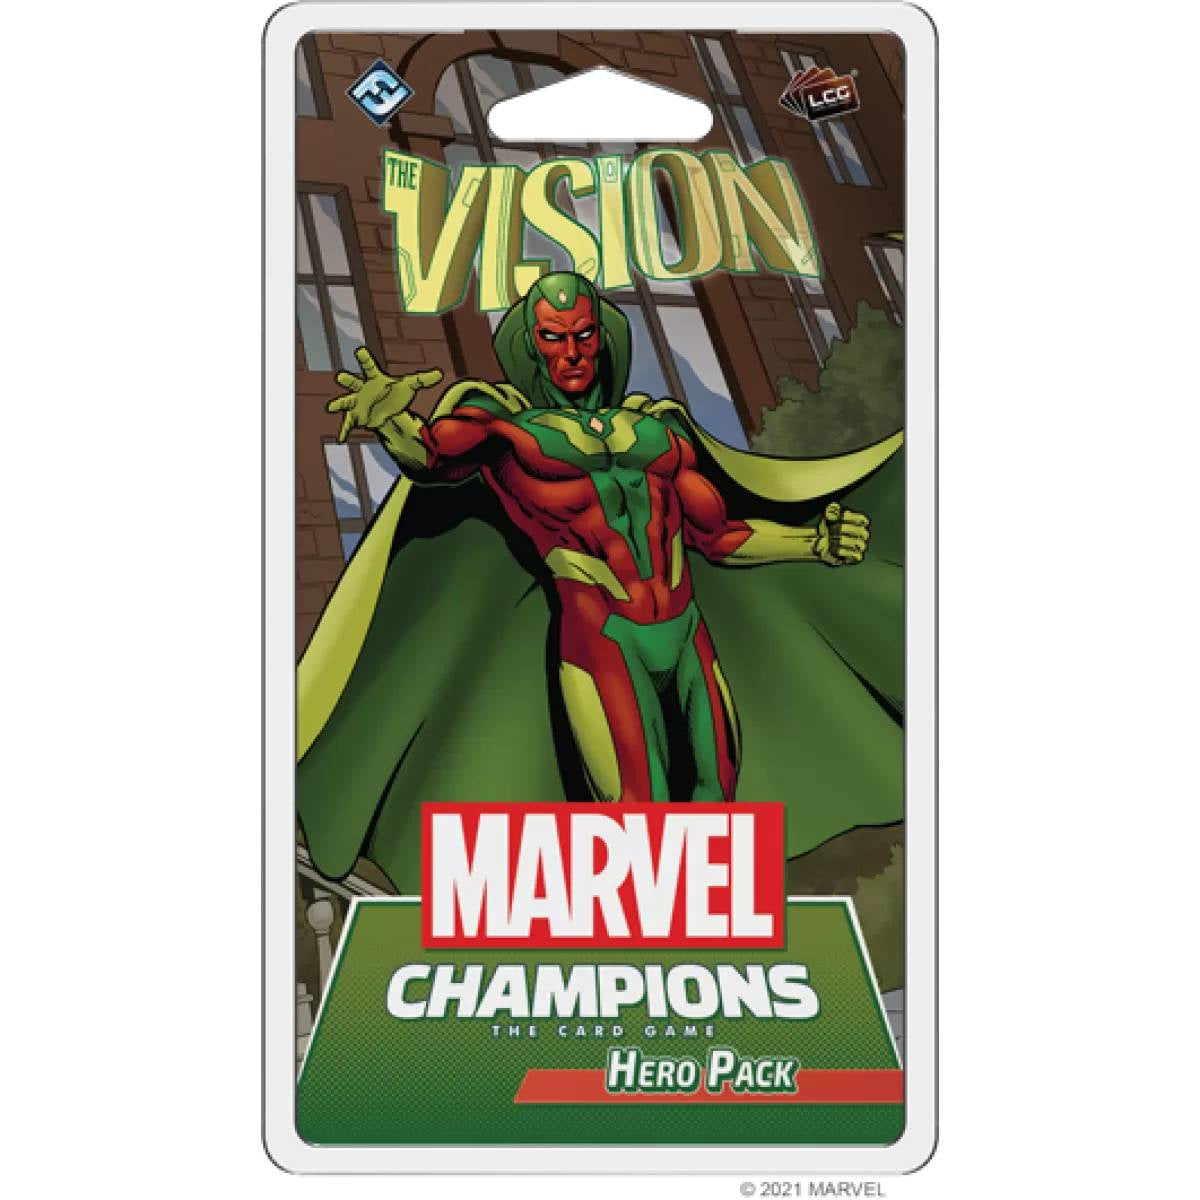 Marvel Champions The Card Game - Vision Hero Pack